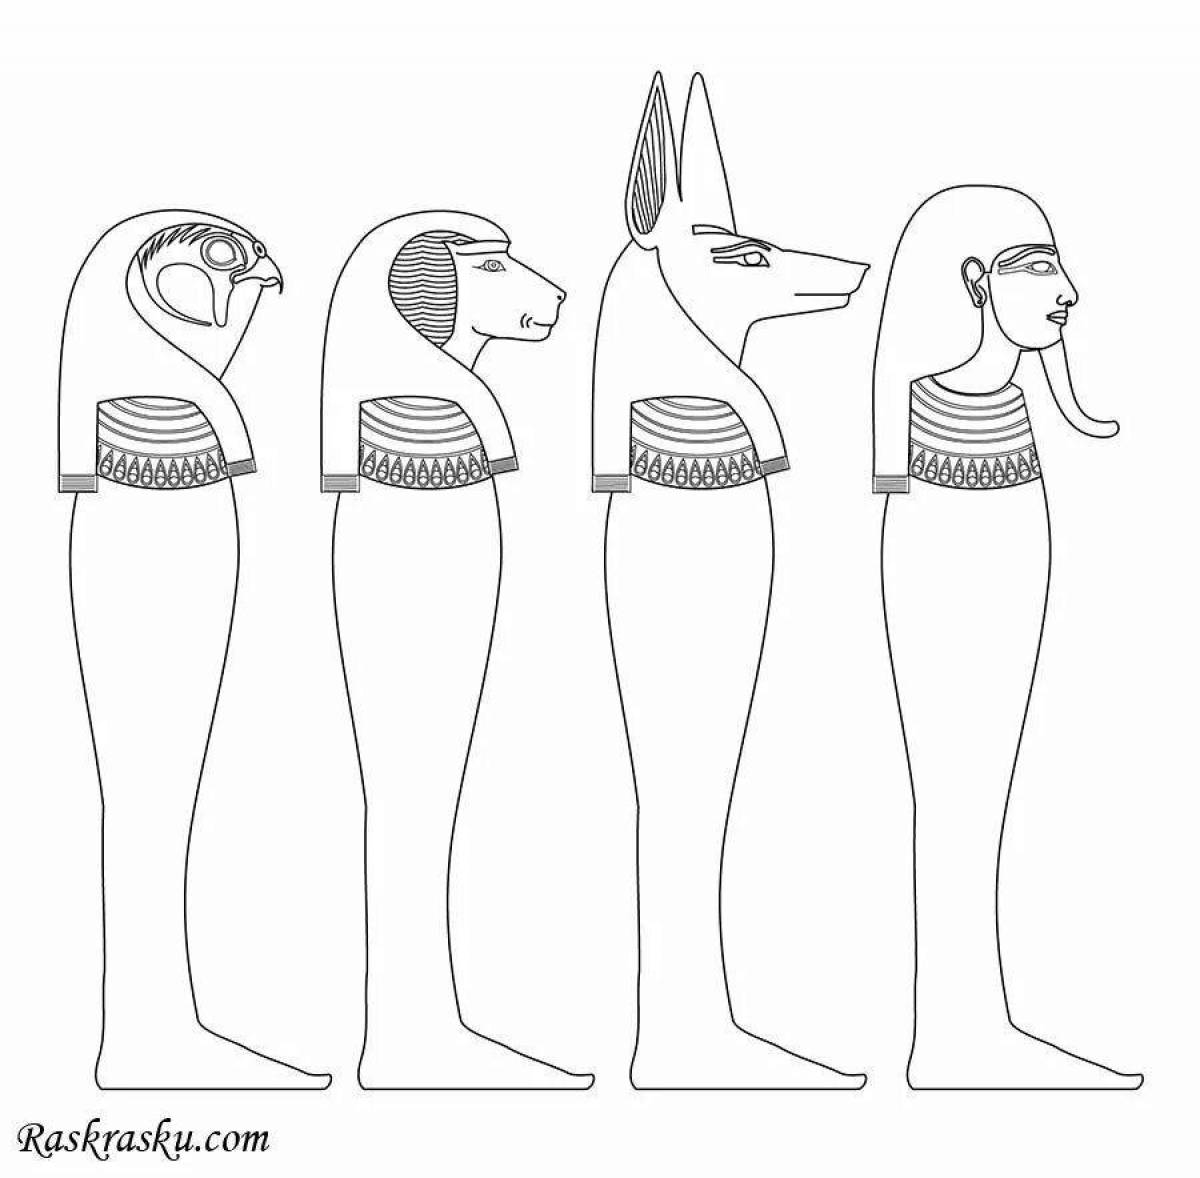 Egyptian gods ornate coloring page